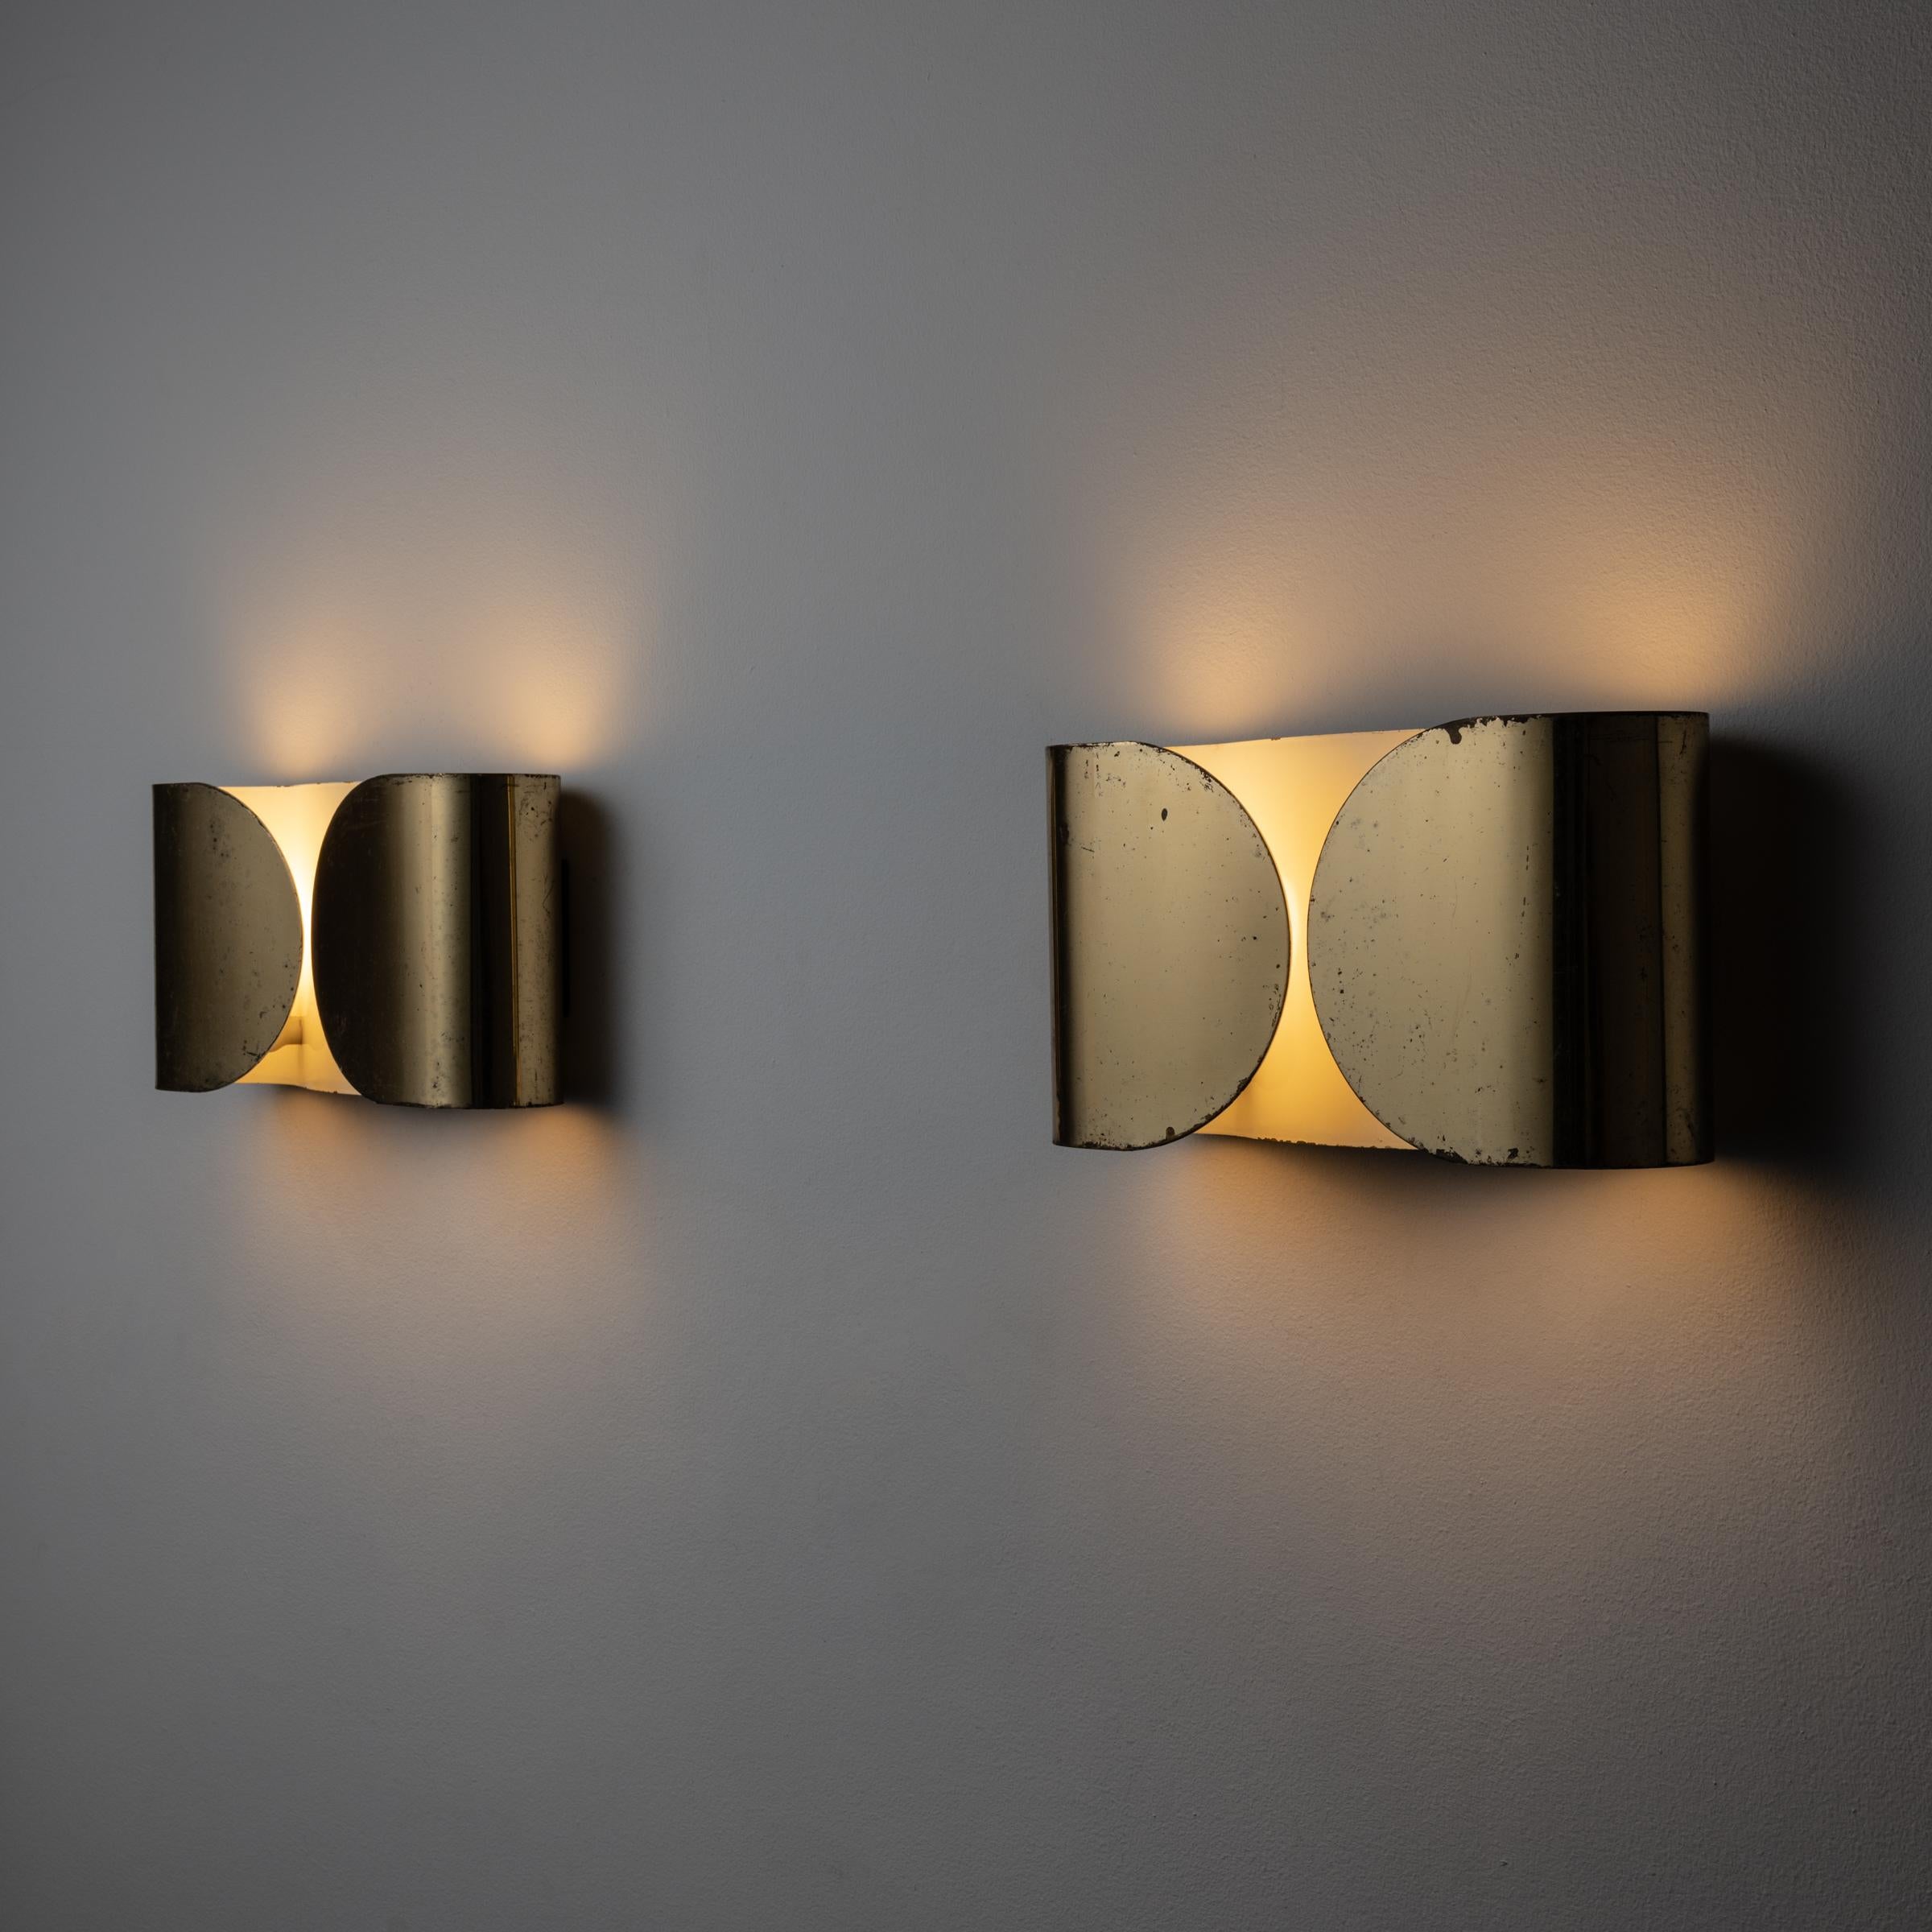 Pair of Foglio sconces by Tobia Scarpa for Flos. Early examples of first production. Designed and manufactured in Italy, 1967. Rewired for U.S. standards. We recommend: two E27 Sockets 75w maximum bulb per fixture. Lightbulbs not included. Priced